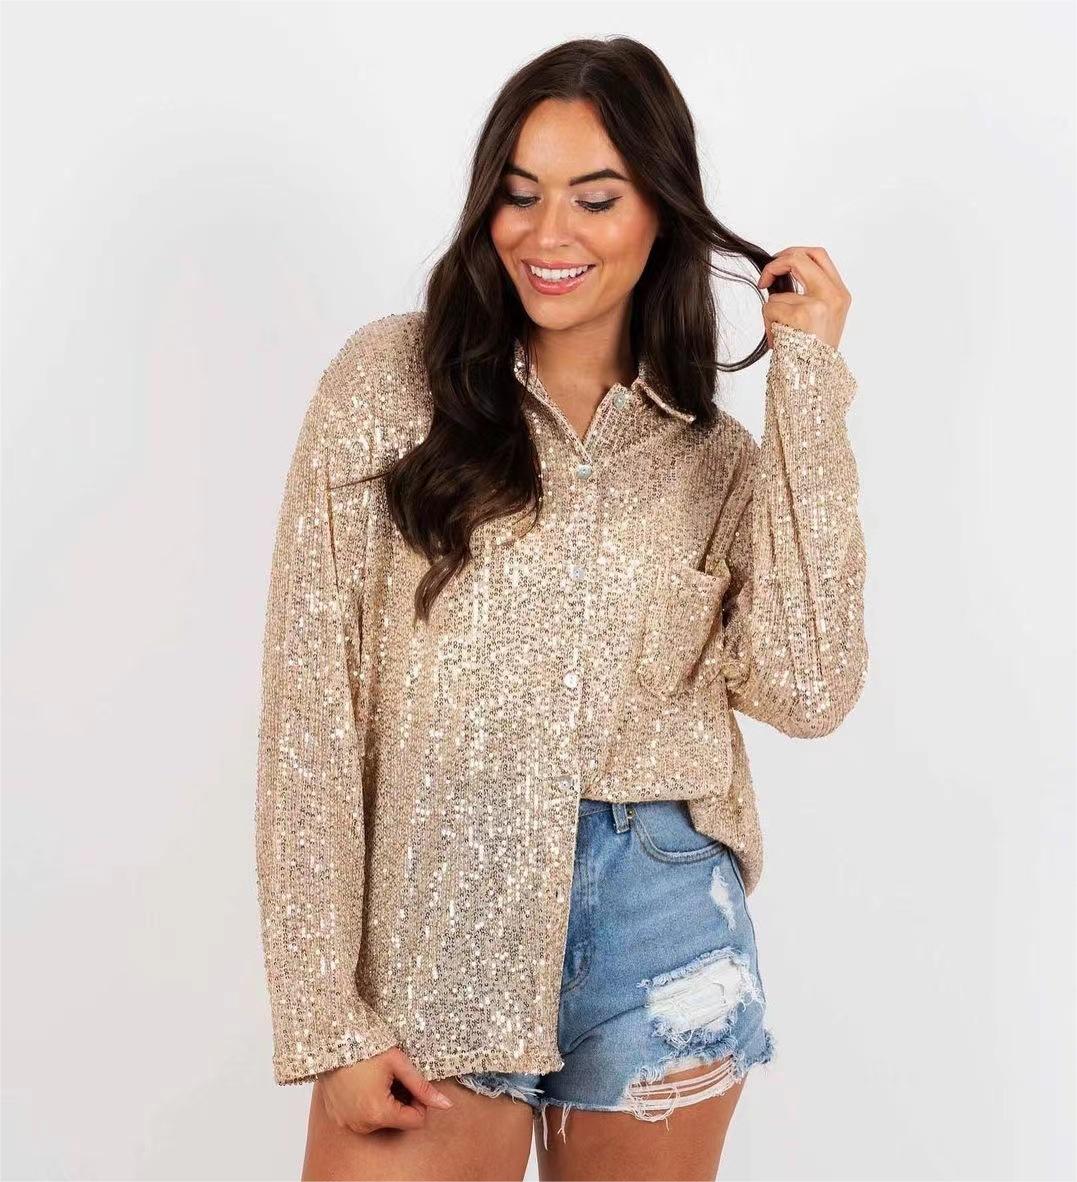 Shirt  | Chic Sequined Long Sleeve Lapel Shirt for Effortless Leisure and Timeless Temperament | |  | thecurvestory.myshopify.com